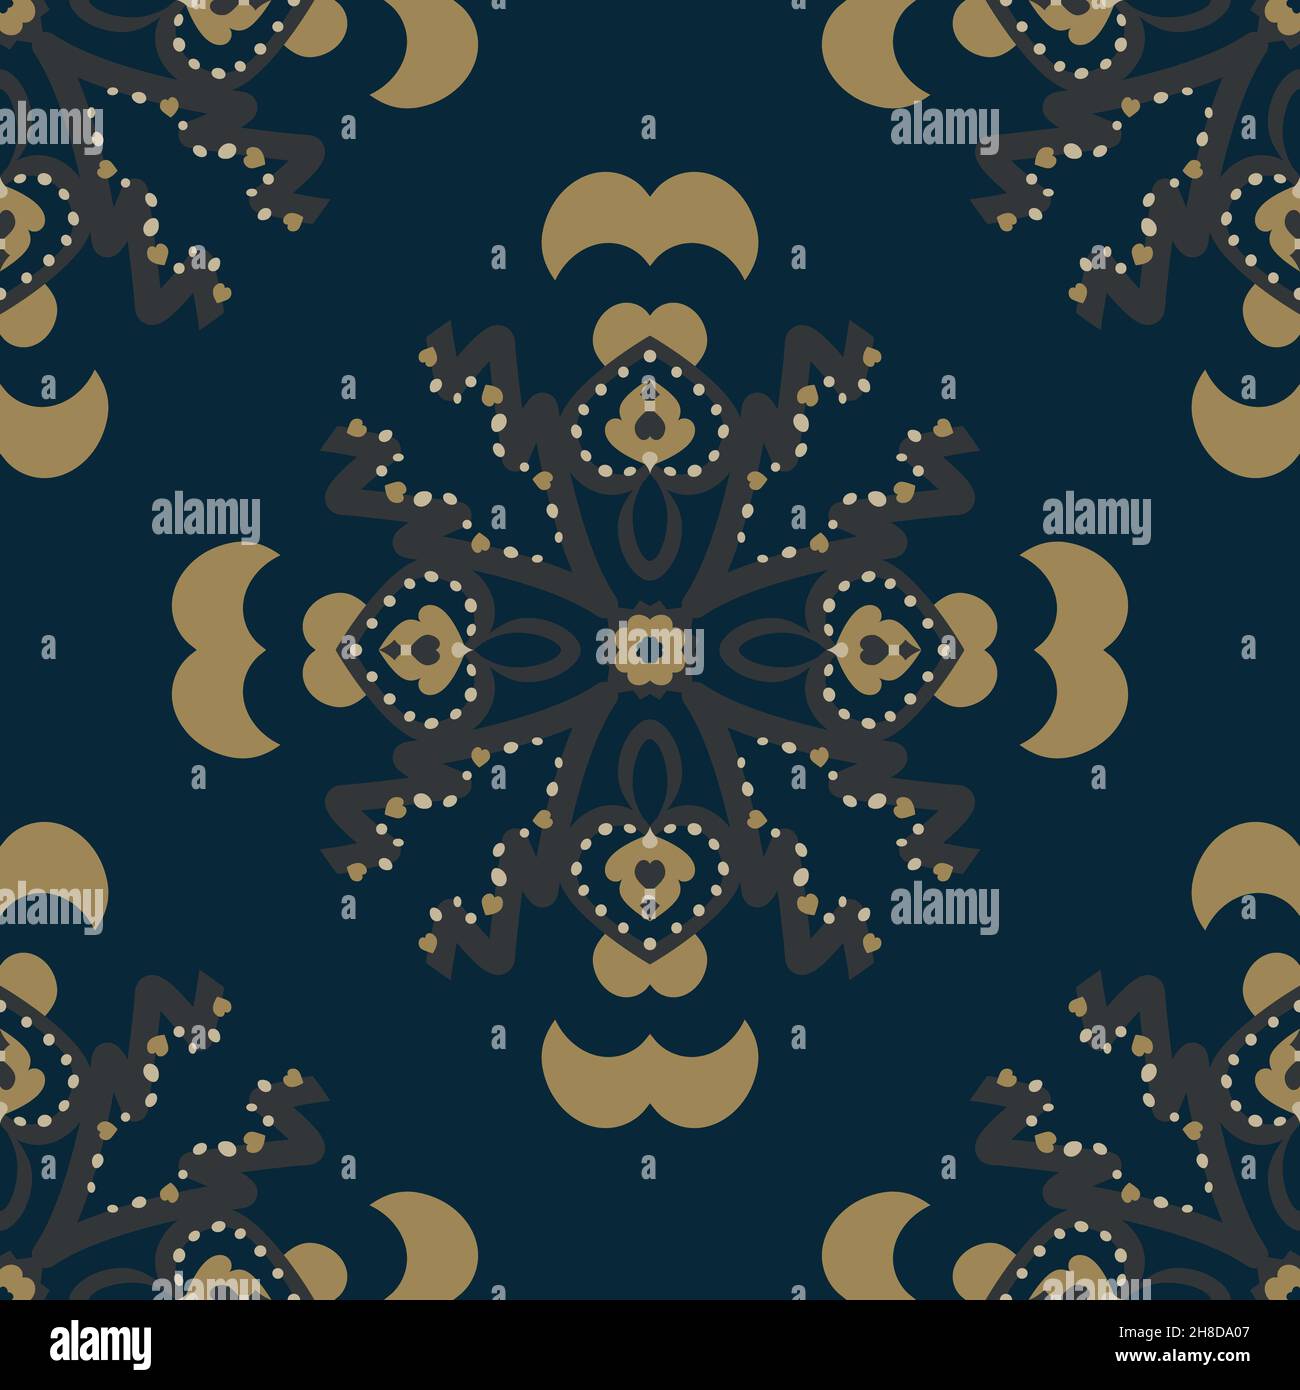 Seamless pattern. Christmas theme with christmas trees and hearts. Colors blue, grey and golden yellow. Stock Photo